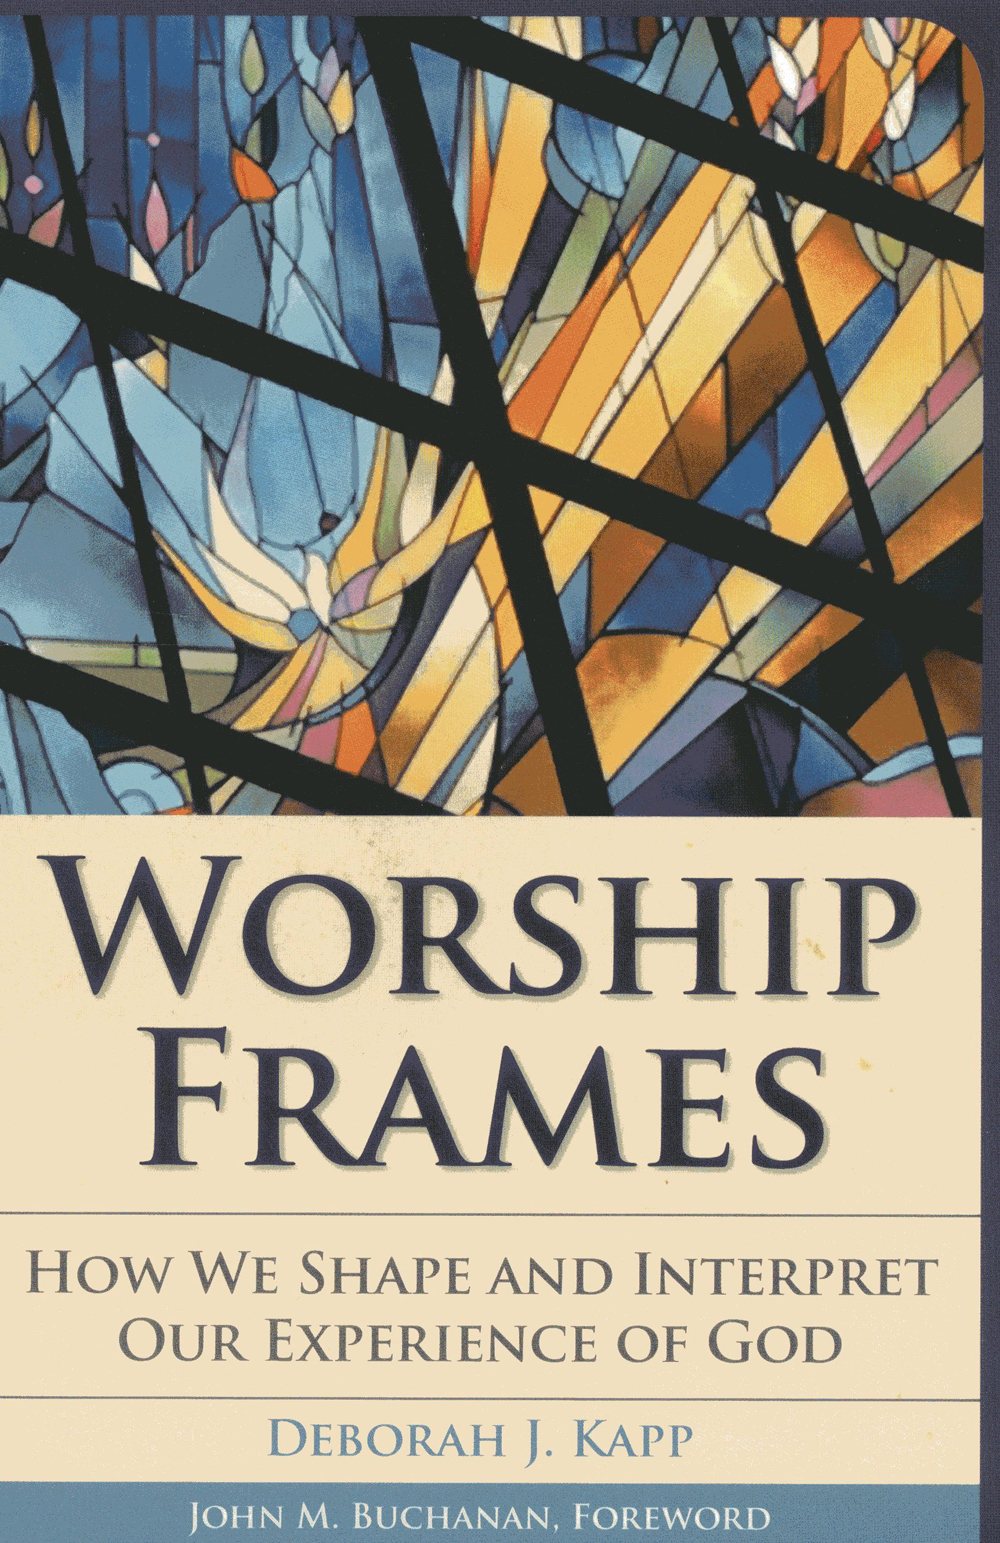 Worship Frames: How We Shape and Interpret Our Experience of God